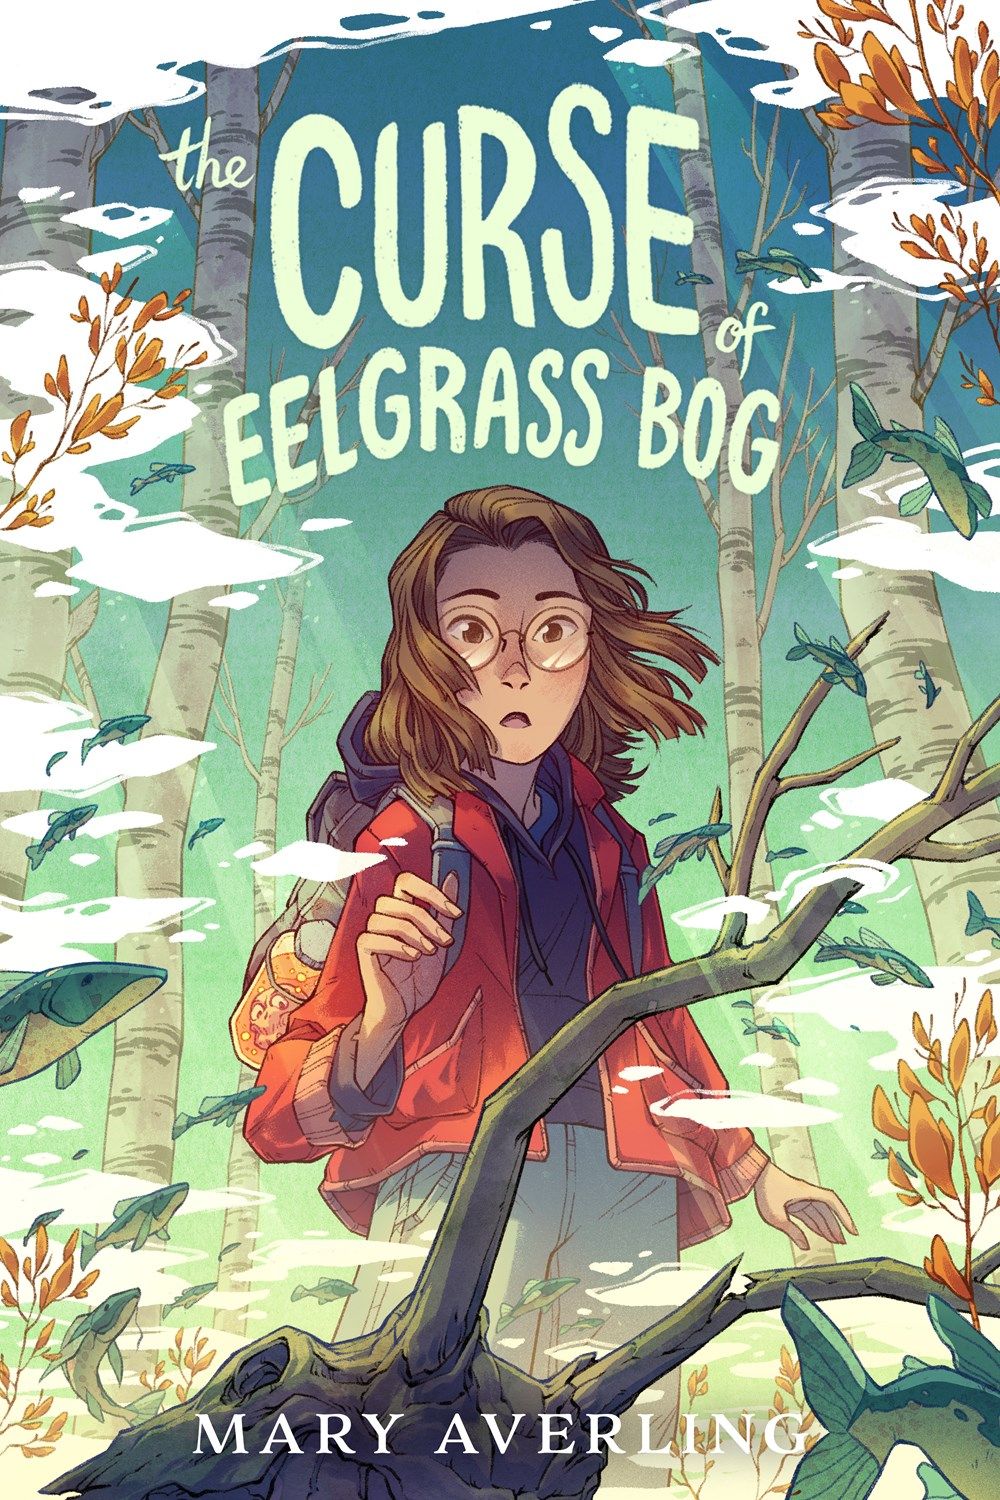 Cover of The Curse of Eelgrass Bog by Averling